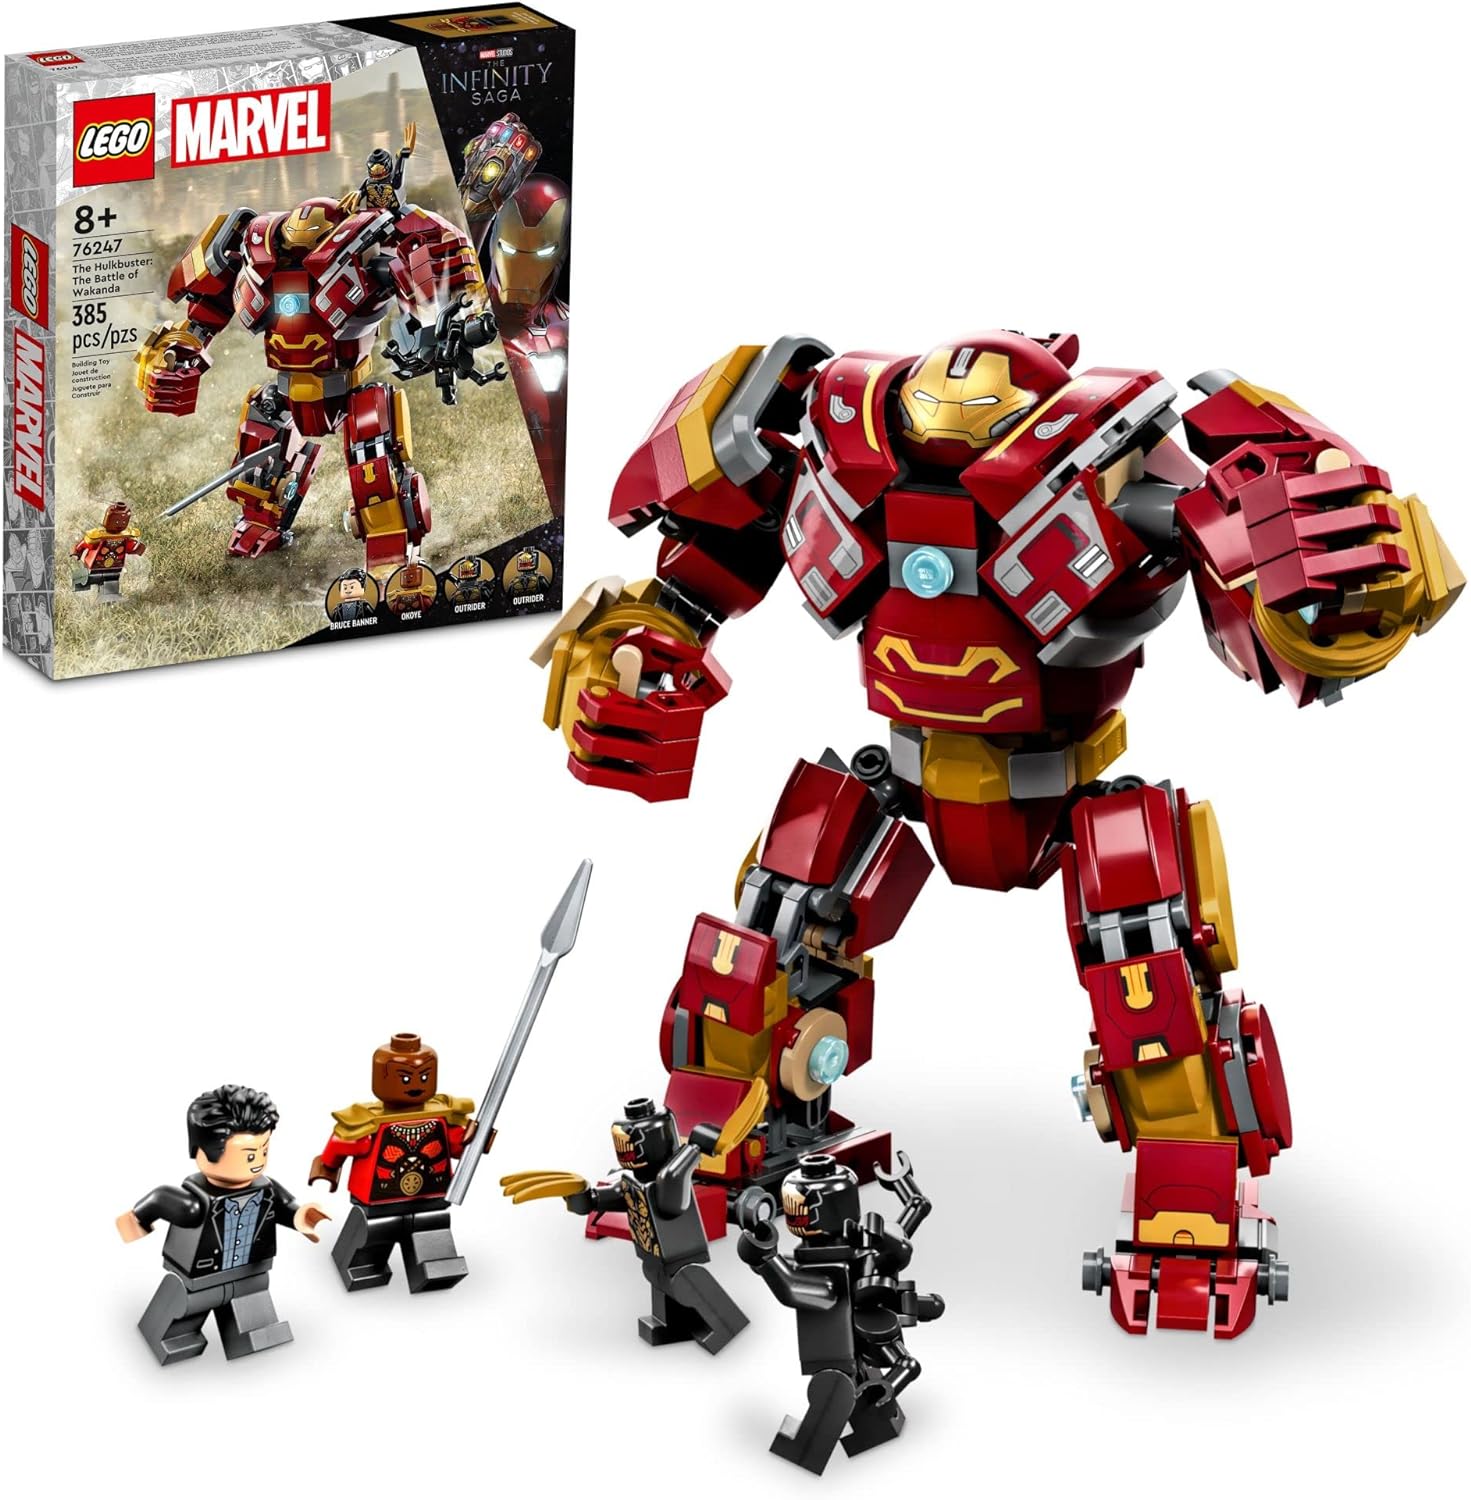 LEGO Marvel The Hulkbuster: The Battle of Wakanda 76247, Action Figure, Buildable Toy with Hulk Bruc